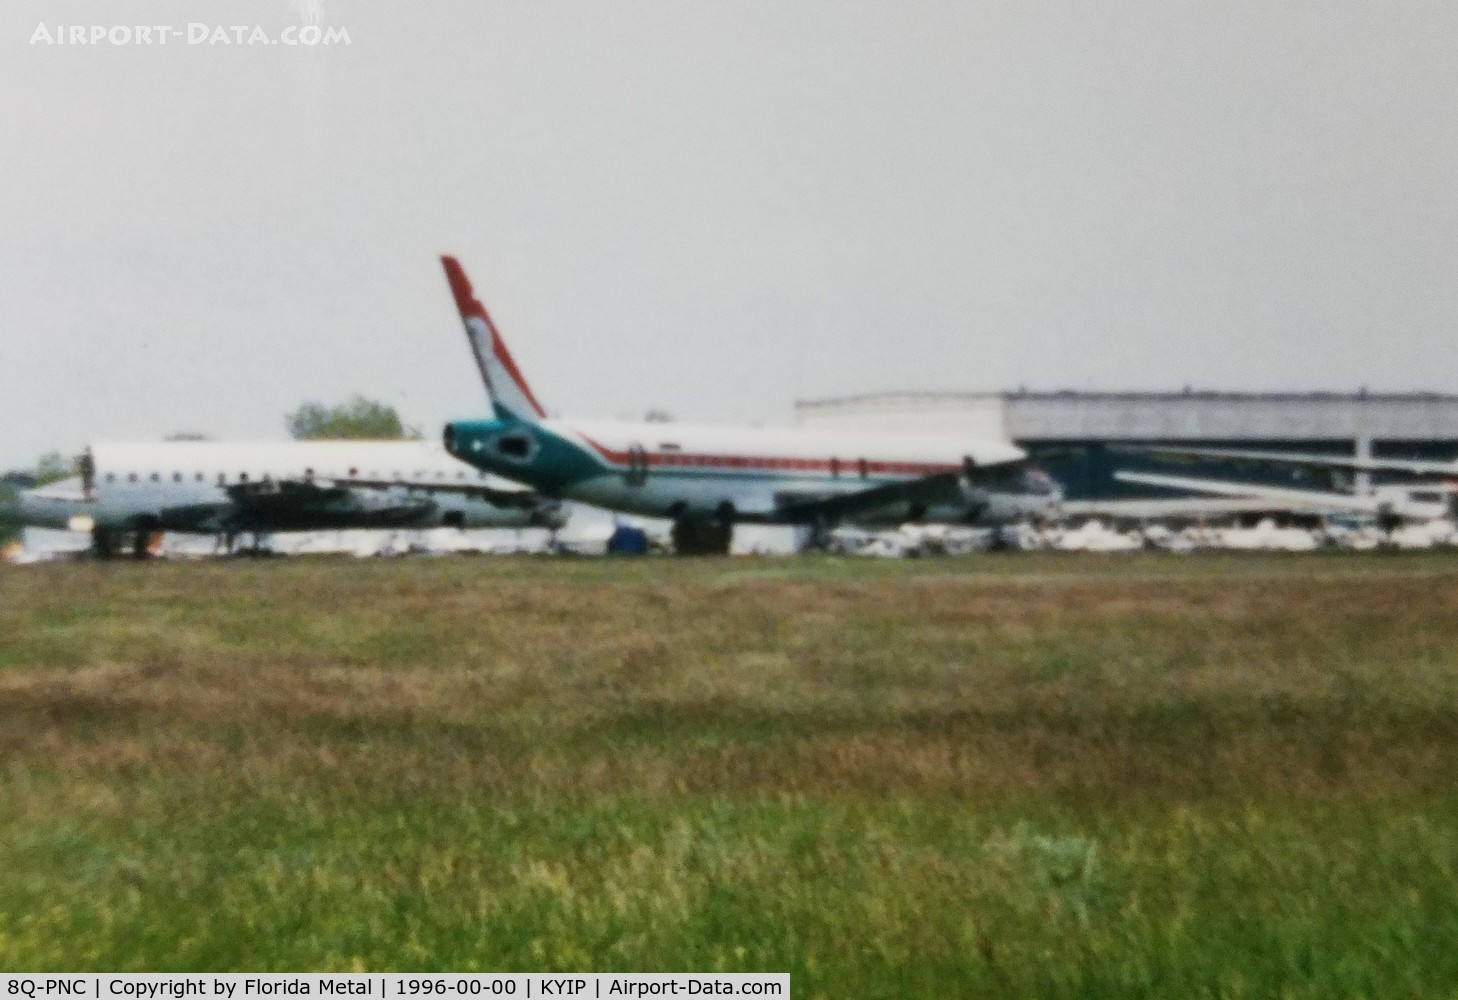 8Q-PNC, 1965 Douglas DC-8-51 C/N 45808, Maldives Airways DC-8 being used for parts by Kalitta